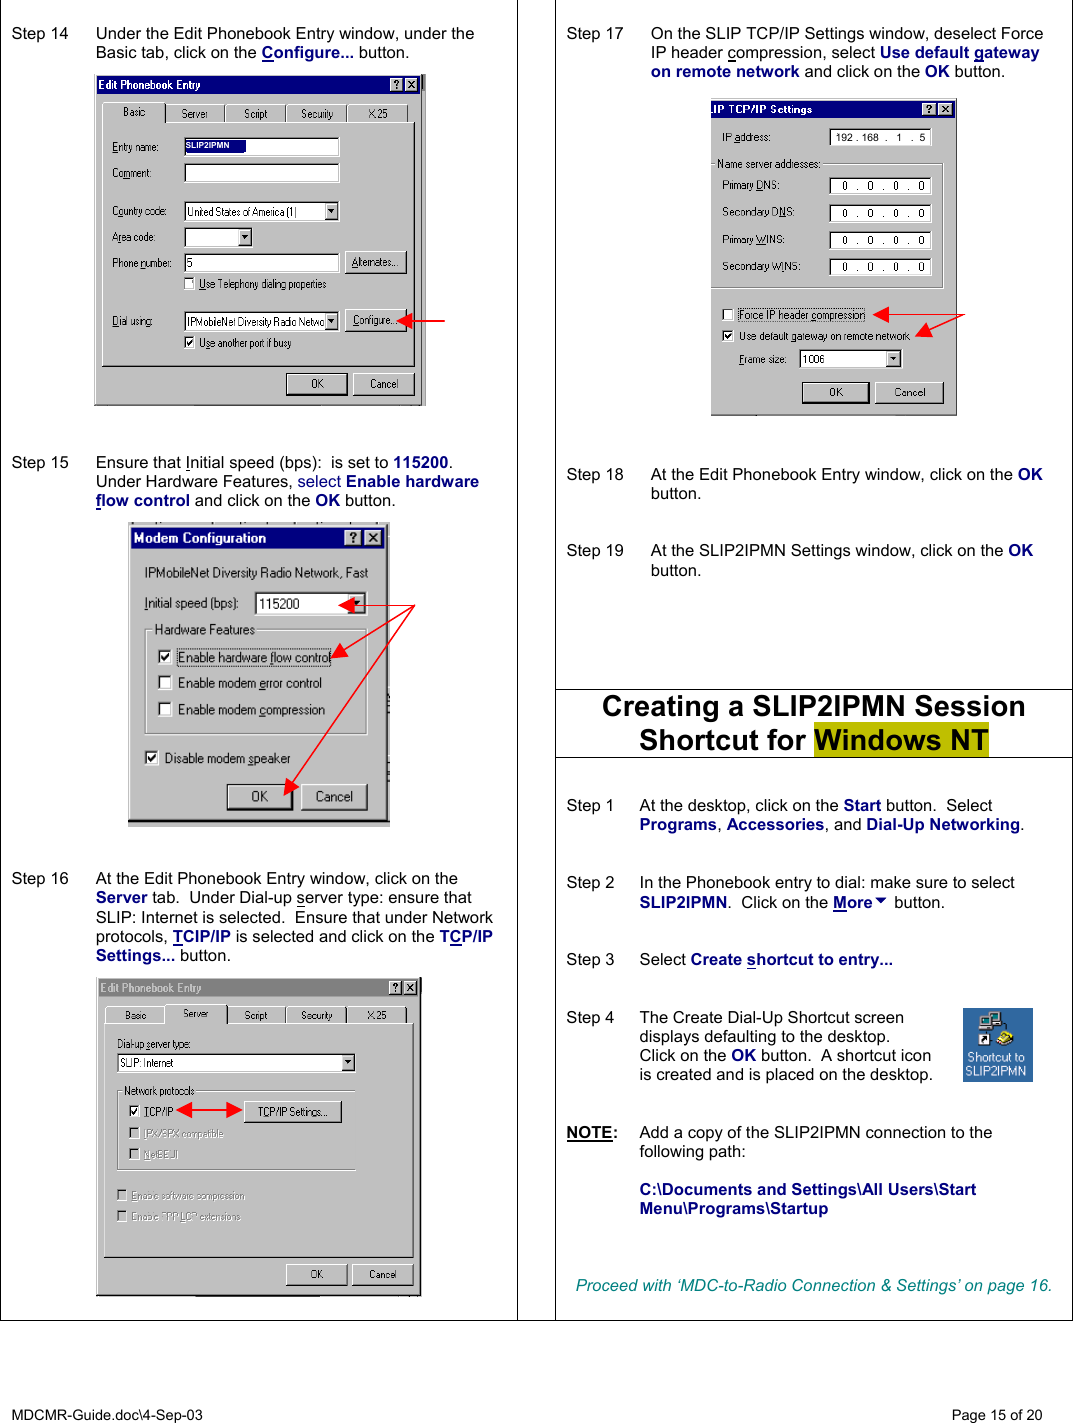 MDCMR-Guide.doc\4-Sep-03   Page 15 of 20  Step 17  On the SLIP TCP/IP Settings window, deselect Force IP header compression, select Use default gateway on remote network and click on the OK button.                 Step 18  At the Edit Phonebook Entry window, click on the OK button.   Step 19  At the SLIP2IPMN Settings window, click on the OK button.   Creating a SLIP2IPMN Session Shortcut for Windows NT  Step 14  Under the Edit Phonebook Entry window, under the Basic tab, click on the Configure... button.                     Step 15  Ensure that Initial speed (bps):  is set to 115200.  Under Hardware Features, select Enable hardware flow control and click on the OK button.     Step 16  At the Edit Phonebook Entry window, click on the Server tab.  Under Dial-up server type: ensure that SLIP: Internet is selected.  Ensure that under Network protocols, TCIP/IP is selected and click on the TCP/IP Settings... button.       Step 1  At the desktop, click on the Start button.  Select Programs, Accessories, and Dial-Up Networking.   Step 2  In the Phonebook entry to dial: make sure to select SLIP2IPMN.  Click on the Moreu button.   Step 3  Select Create shortcut to entry...   Step 4  The Create Dial-Up Shortcut screen   displays defaulting to the desktop.    Click on the OK button.  A shortcut icon   is created and is placed on the desktop.   NOTE:  Add a copy of the SLIP2IPMN connection to the following path:   C:\Documents and Settings\All Users\Start Menu\Programs\Startup    Proceed with ‘MDC-to-Radio Connection &amp; Settings’ on page 16.      192 . 168  .   1   .  5 SLIP2IPMN 